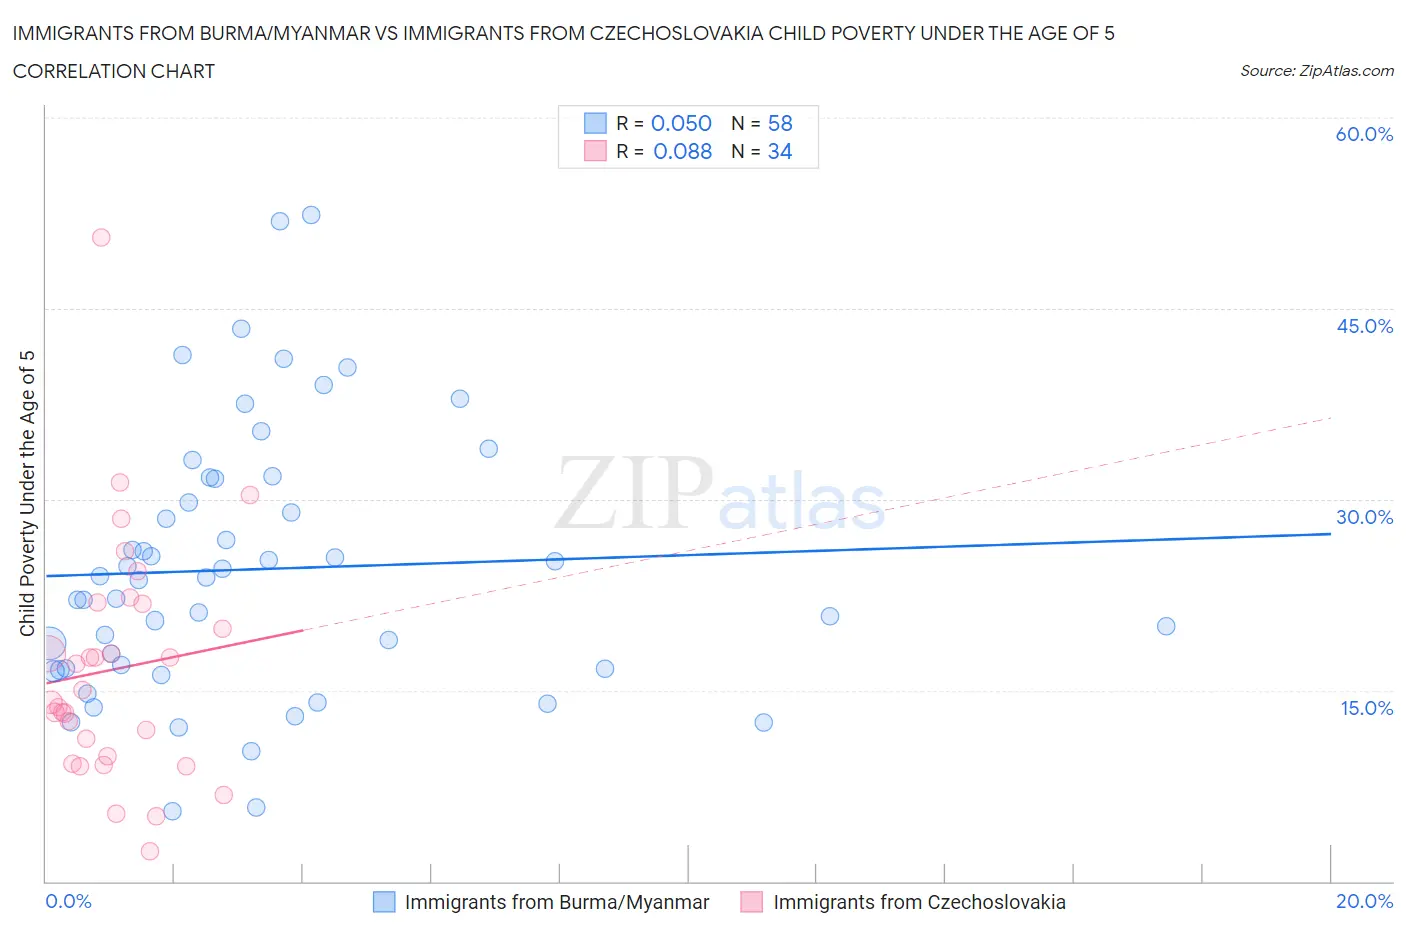 Immigrants from Burma/Myanmar vs Immigrants from Czechoslovakia Child Poverty Under the Age of 5